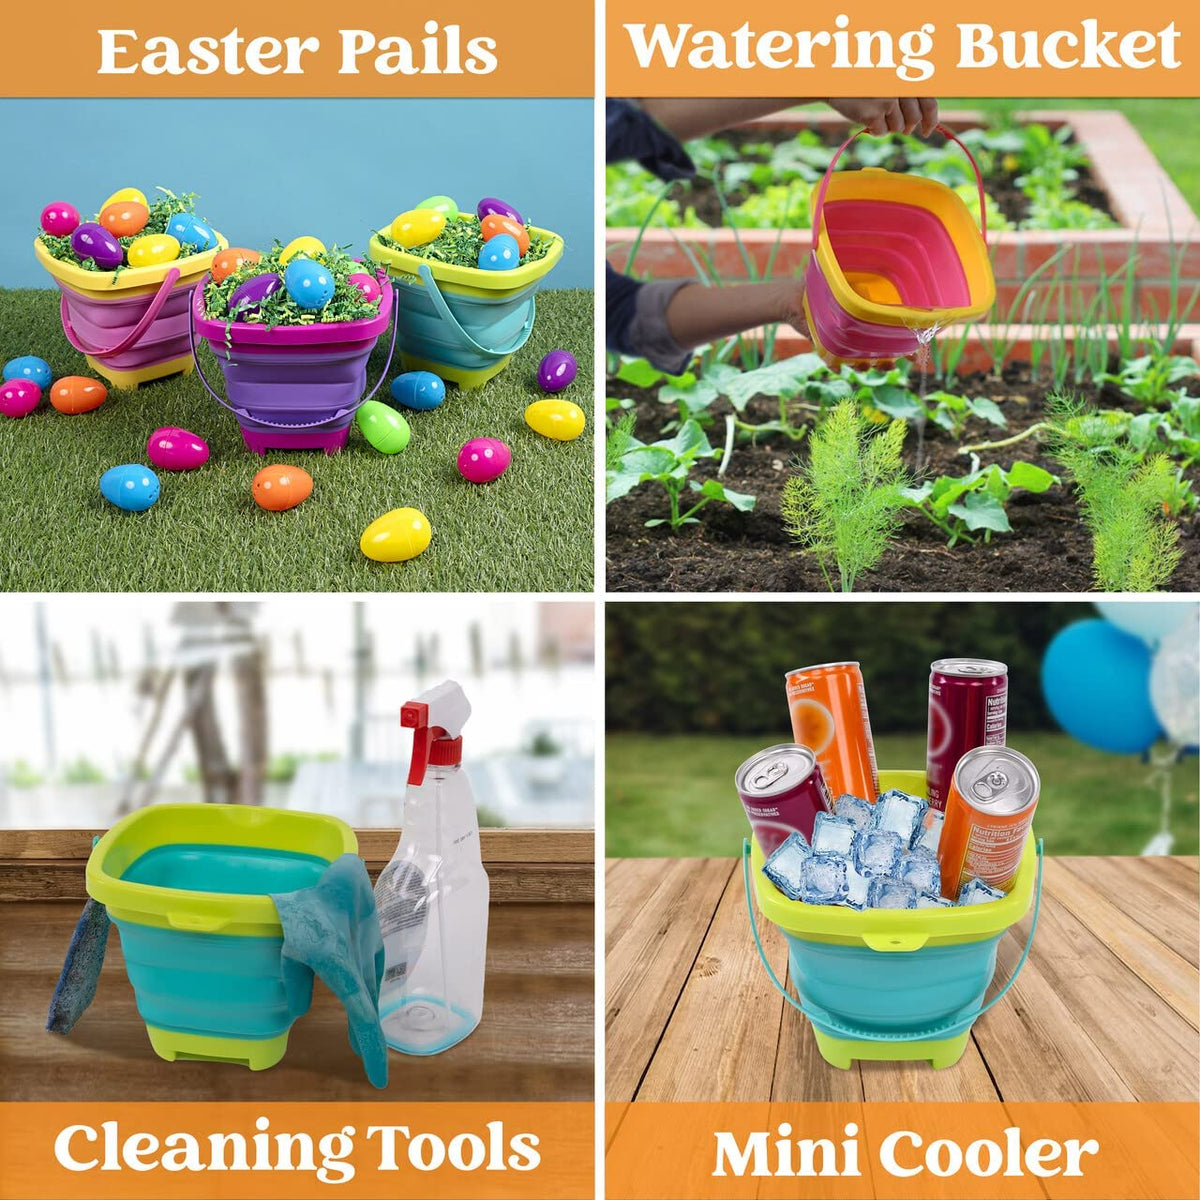 Collapsible Basket Buckets Sand Buckets For Kids With Shovel